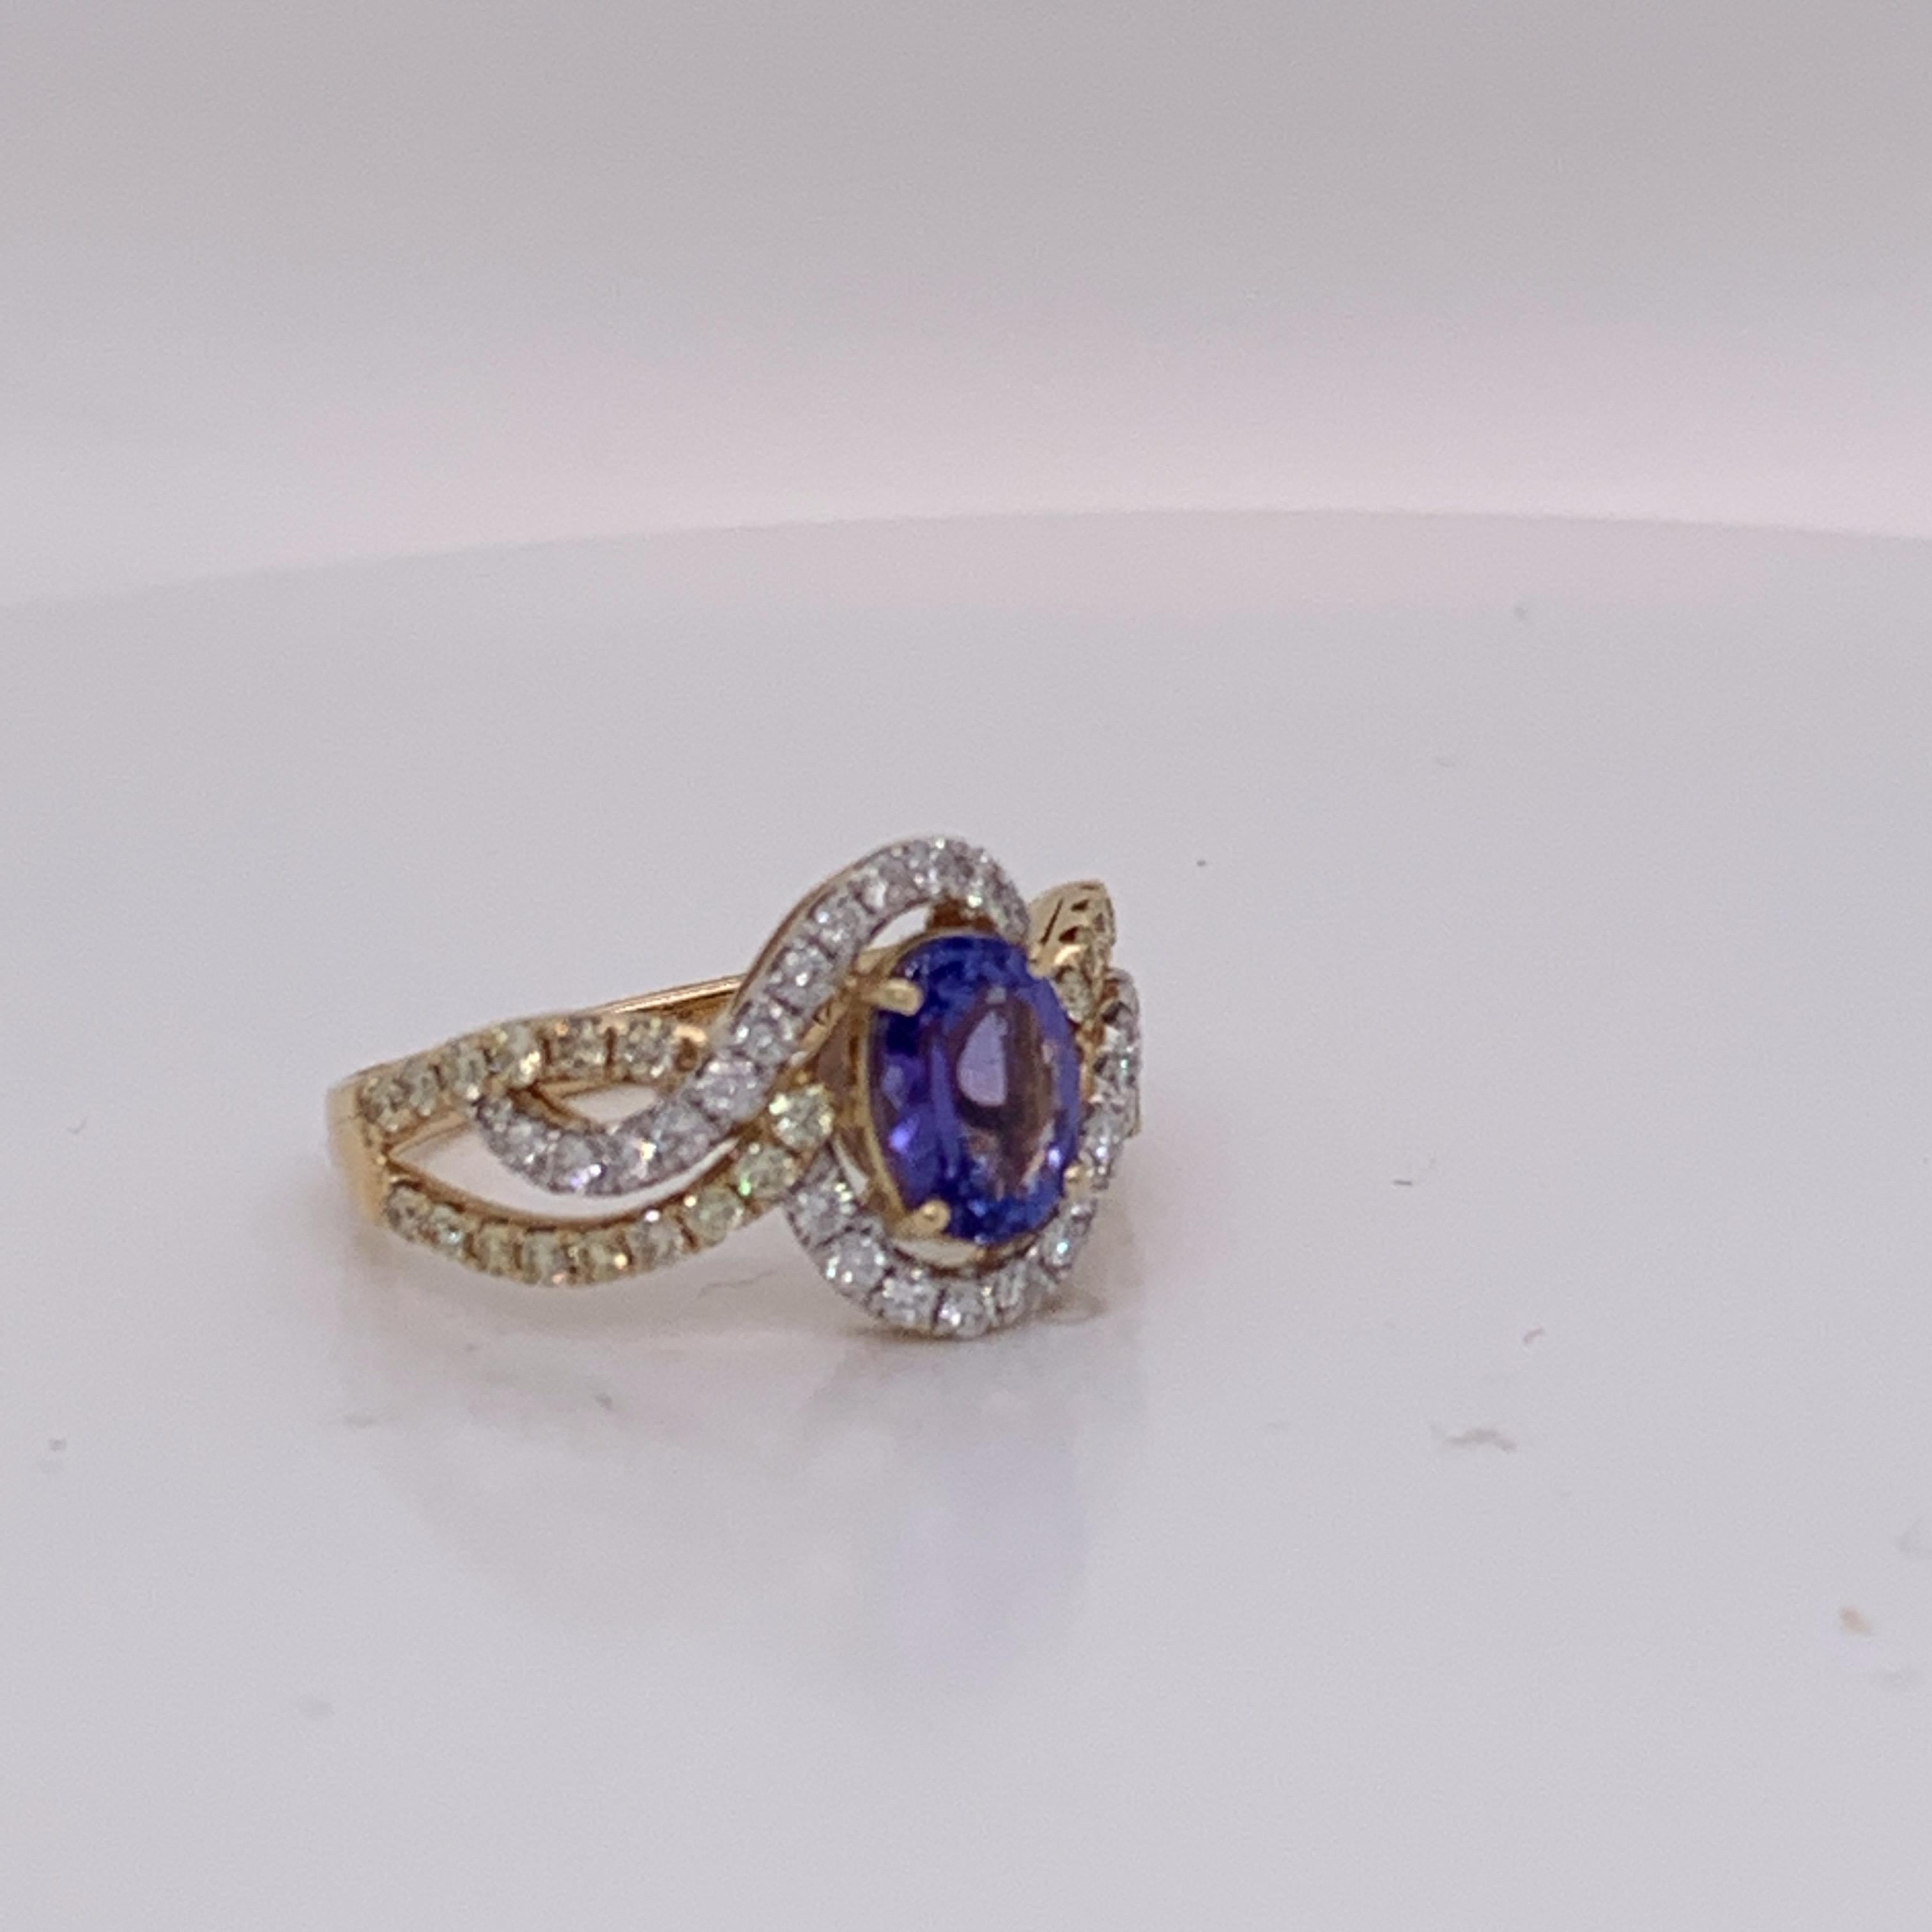 Oval Tanzanite Ring with yellow and white diamond. Crafted with hand in yellow gold.
Tanzanite: 1.12ct
Yellow Diamond: 0.37ct
White Diamond: 0.31ct
Yellow Gold: 14K
Ring Size: 7 (resizeable)